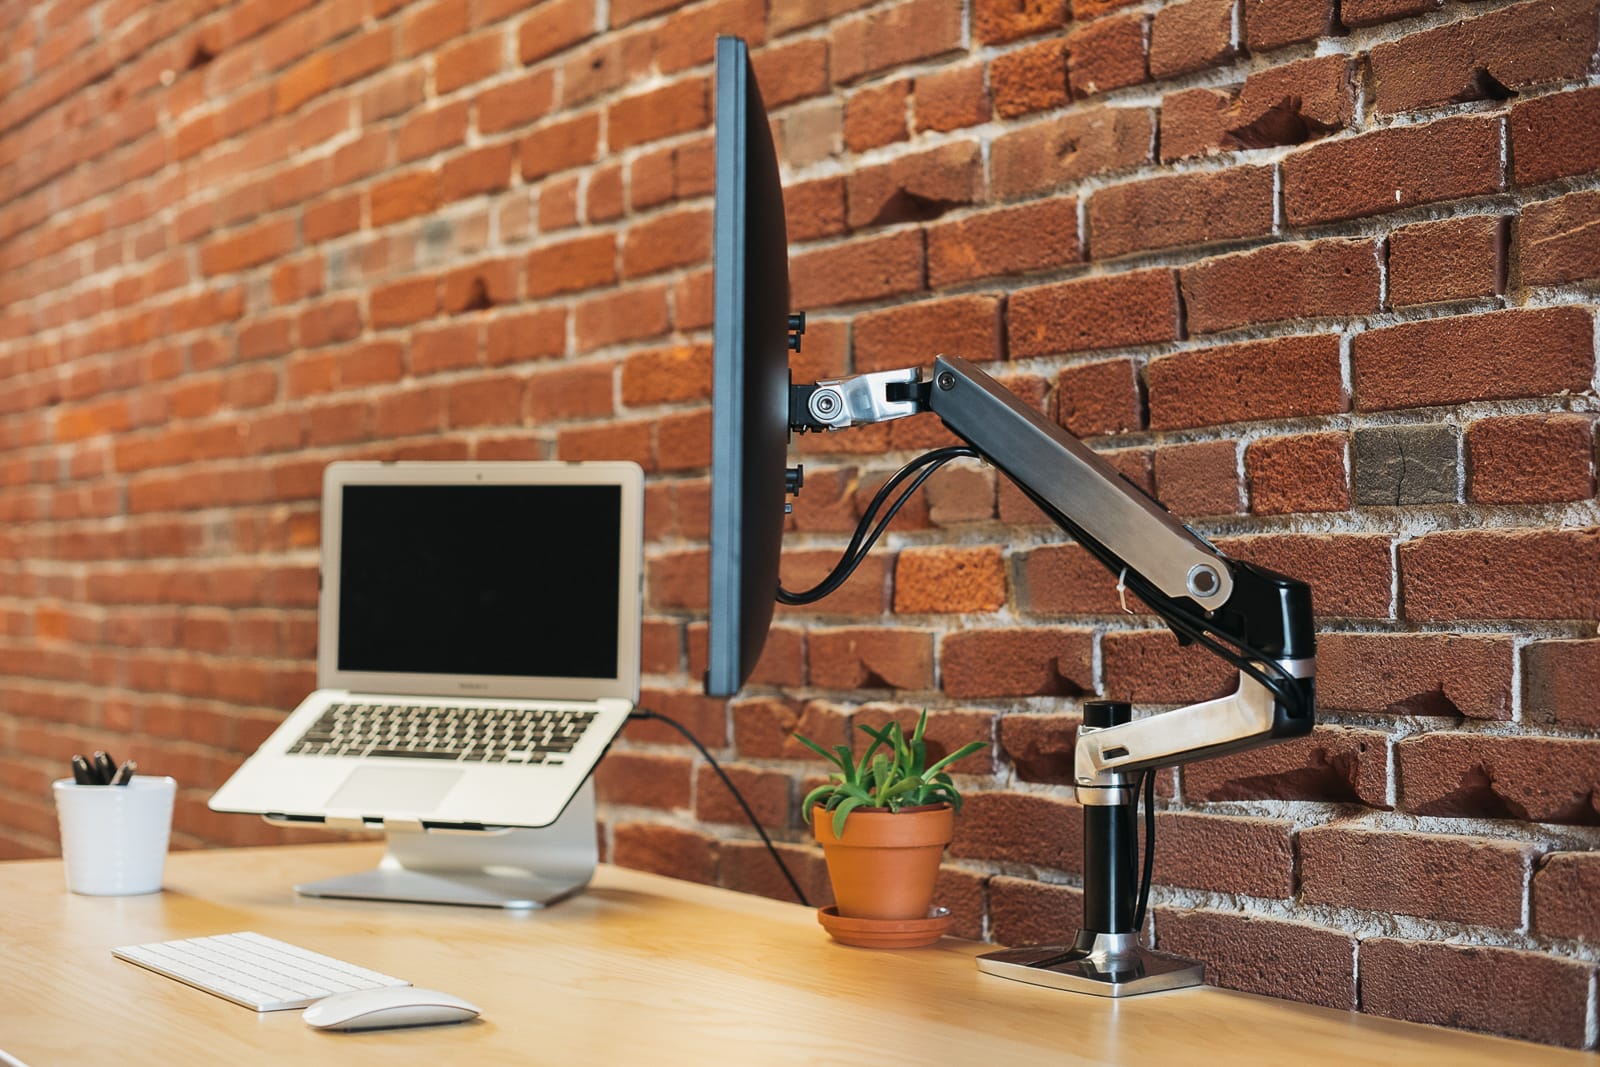 The Best Monitor Arms Engadget, Dual Monitor Mount Desk Against Wall